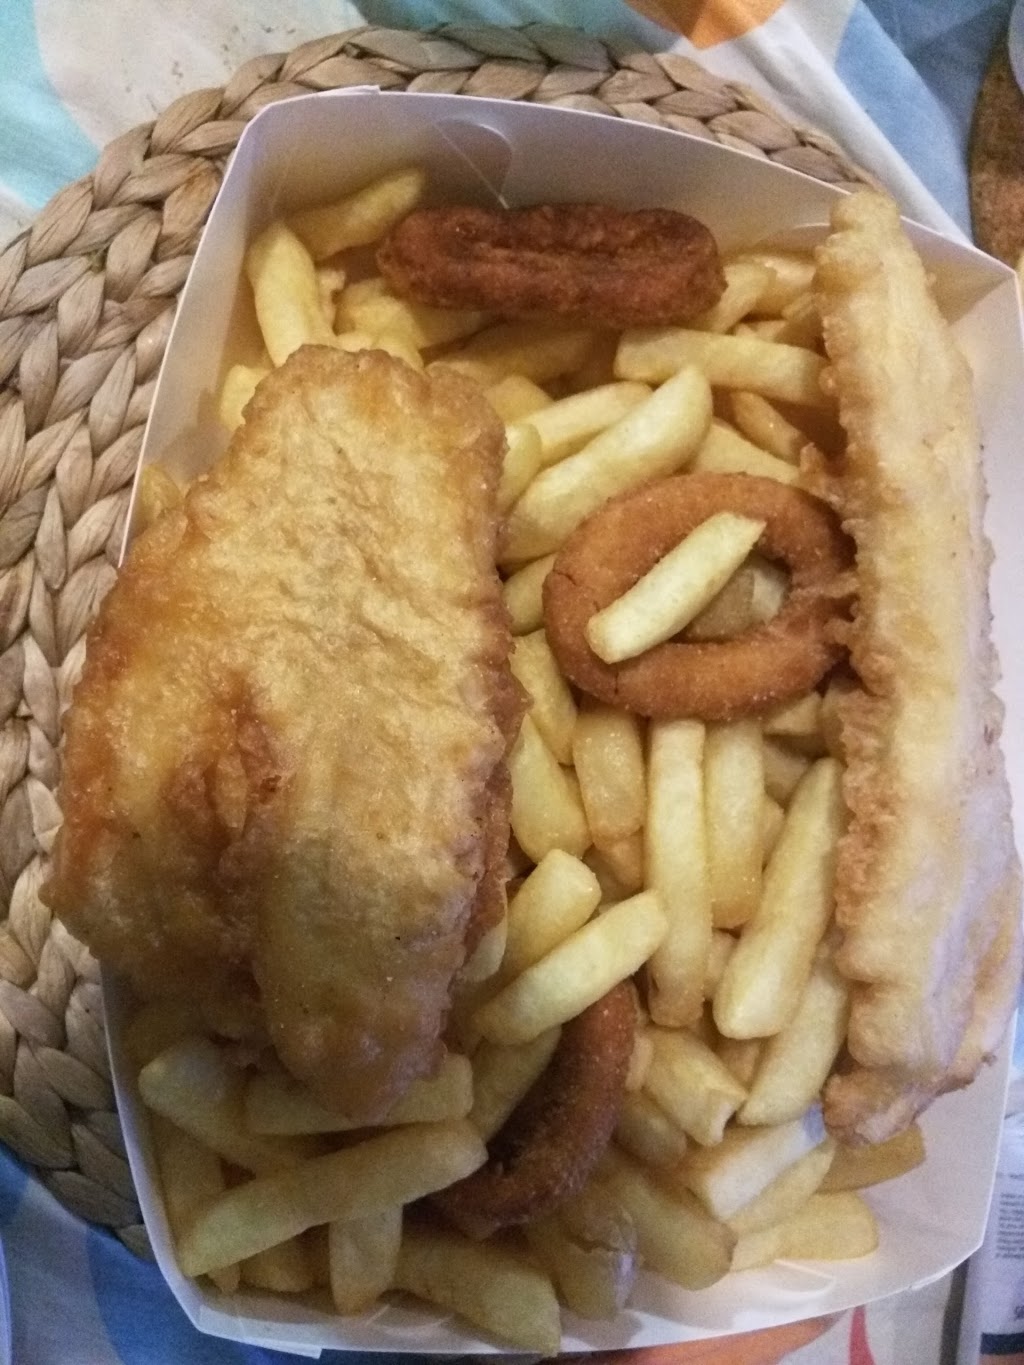 Grey Shark Fish & Chips | meal takeaway | 3/11 Old Lilydale Rd, Ringwood East VIC 3135, Australia | 0398792567 OR +61 3 9879 2567